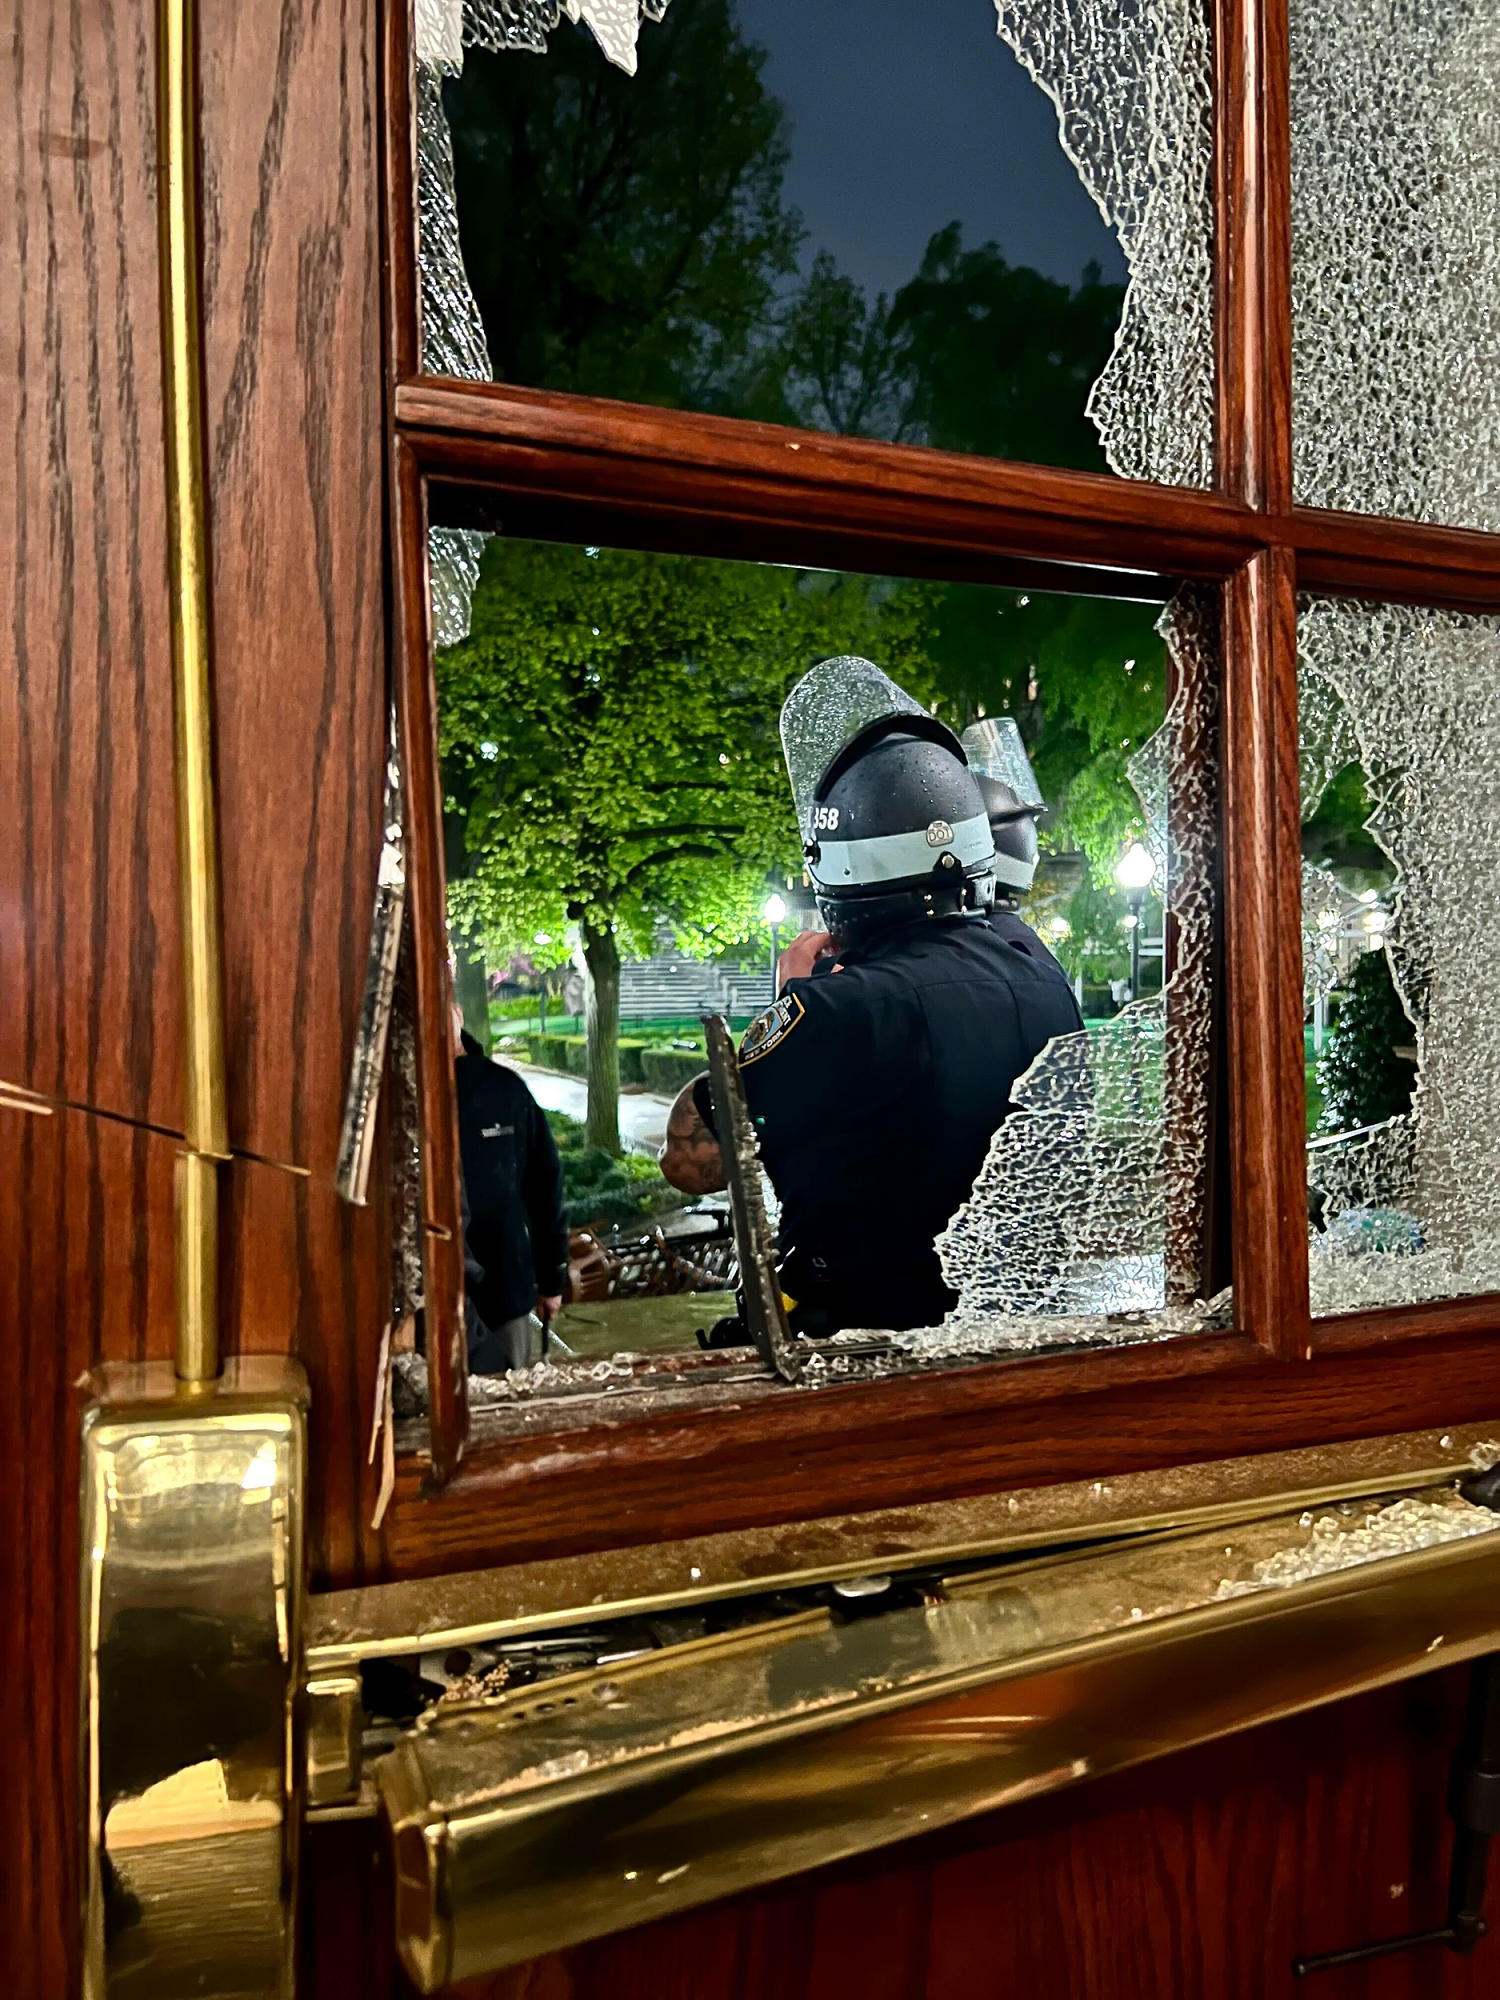 Smashed windows and piled furniture left after occupation of Hamilton Hall